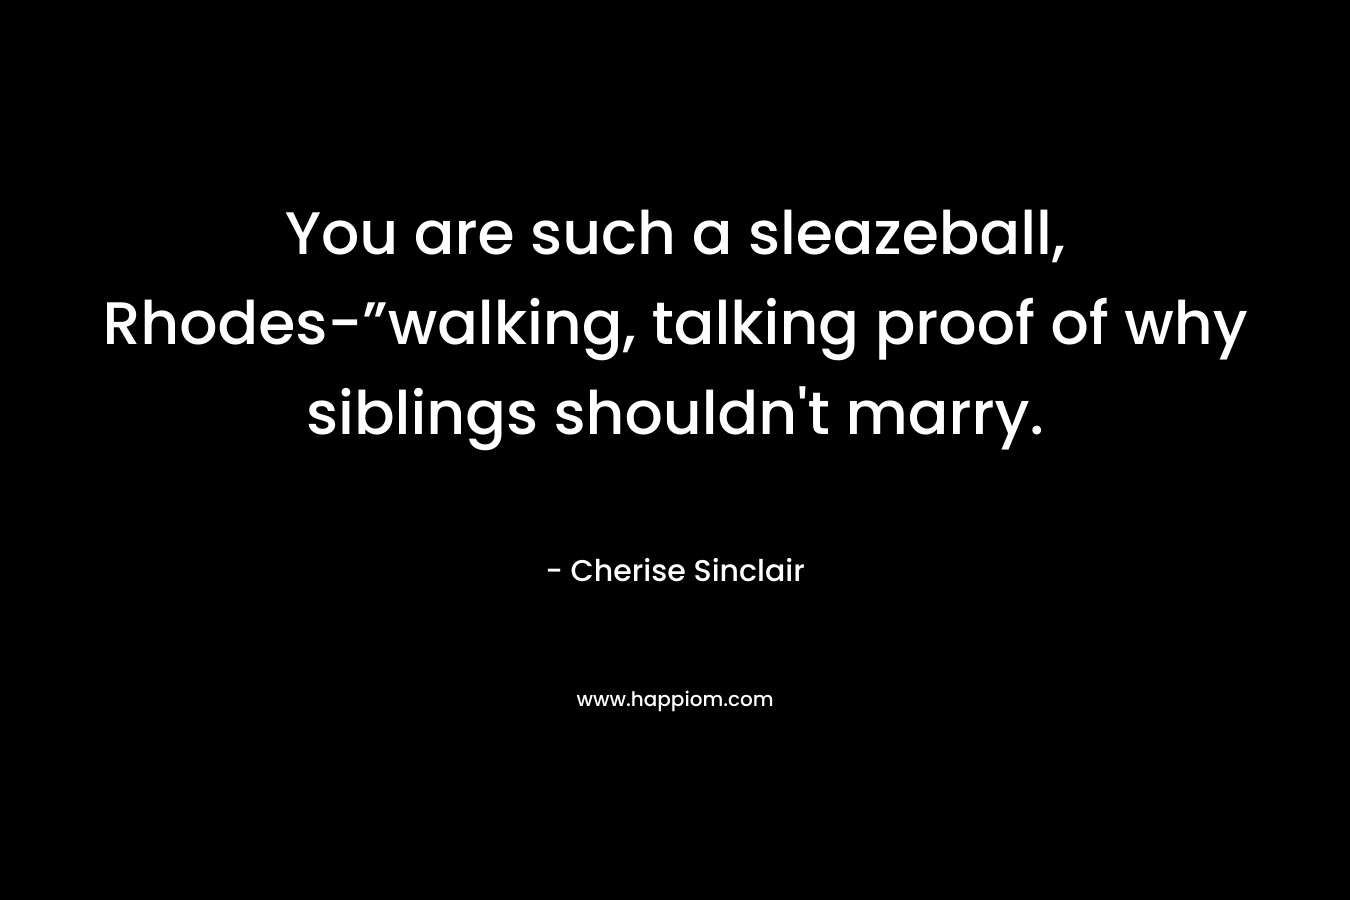 You are such a sleazeball, Rhodes-”walking, talking proof of why siblings shouldn’t marry. – Cherise Sinclair